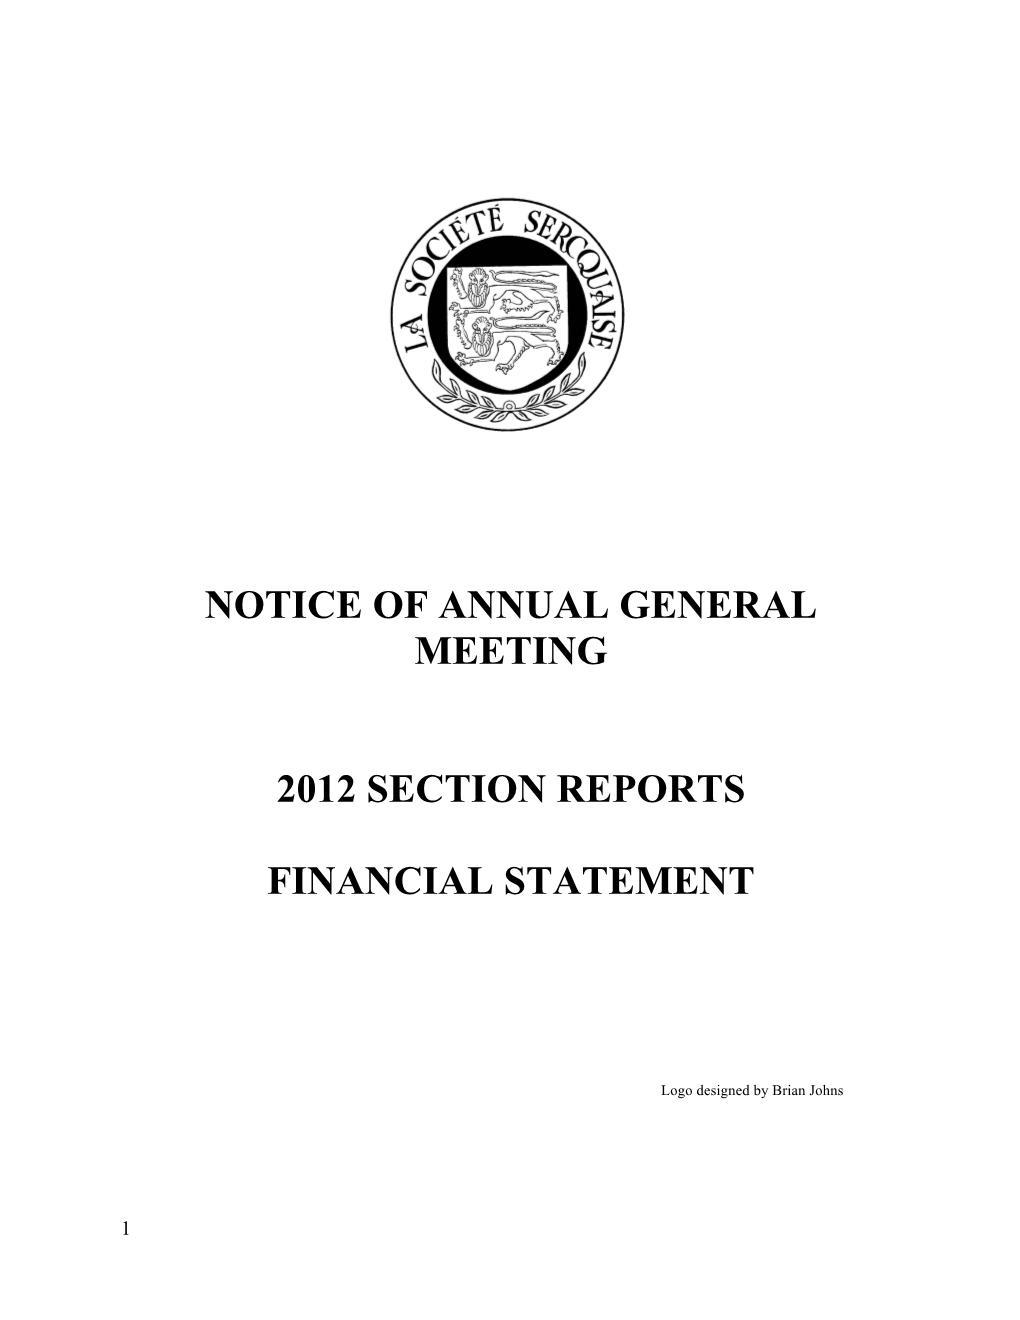 Notice of Annual General Meeting 2012 Section